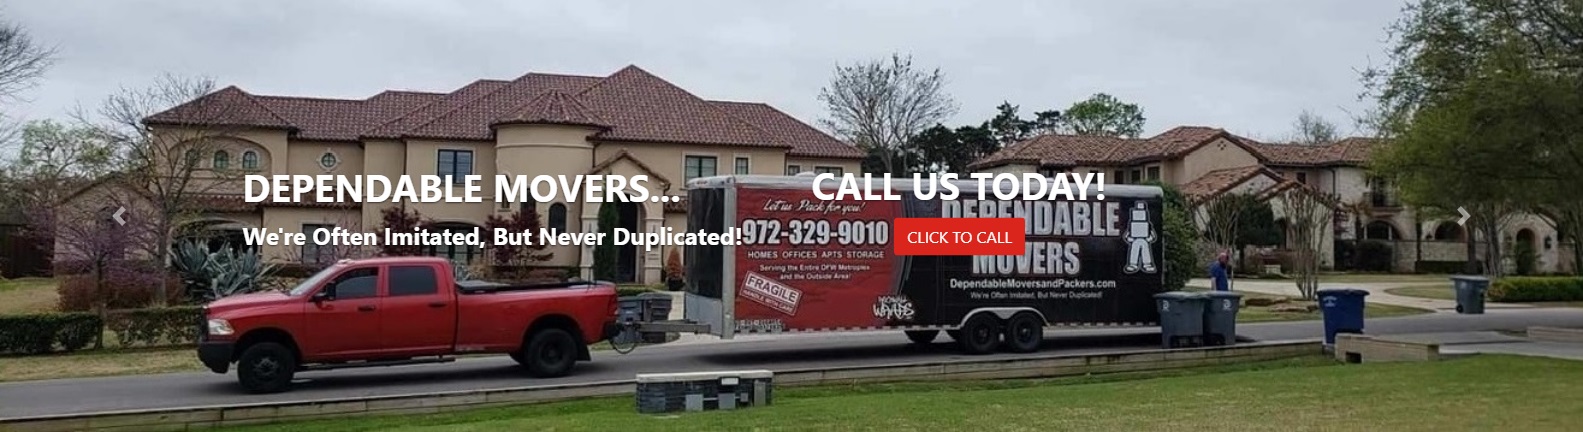 Dependable Movers in the Frisco Texas area - Home Office Apartment Movers Residential Commercial Movers in the Frisco Texas area